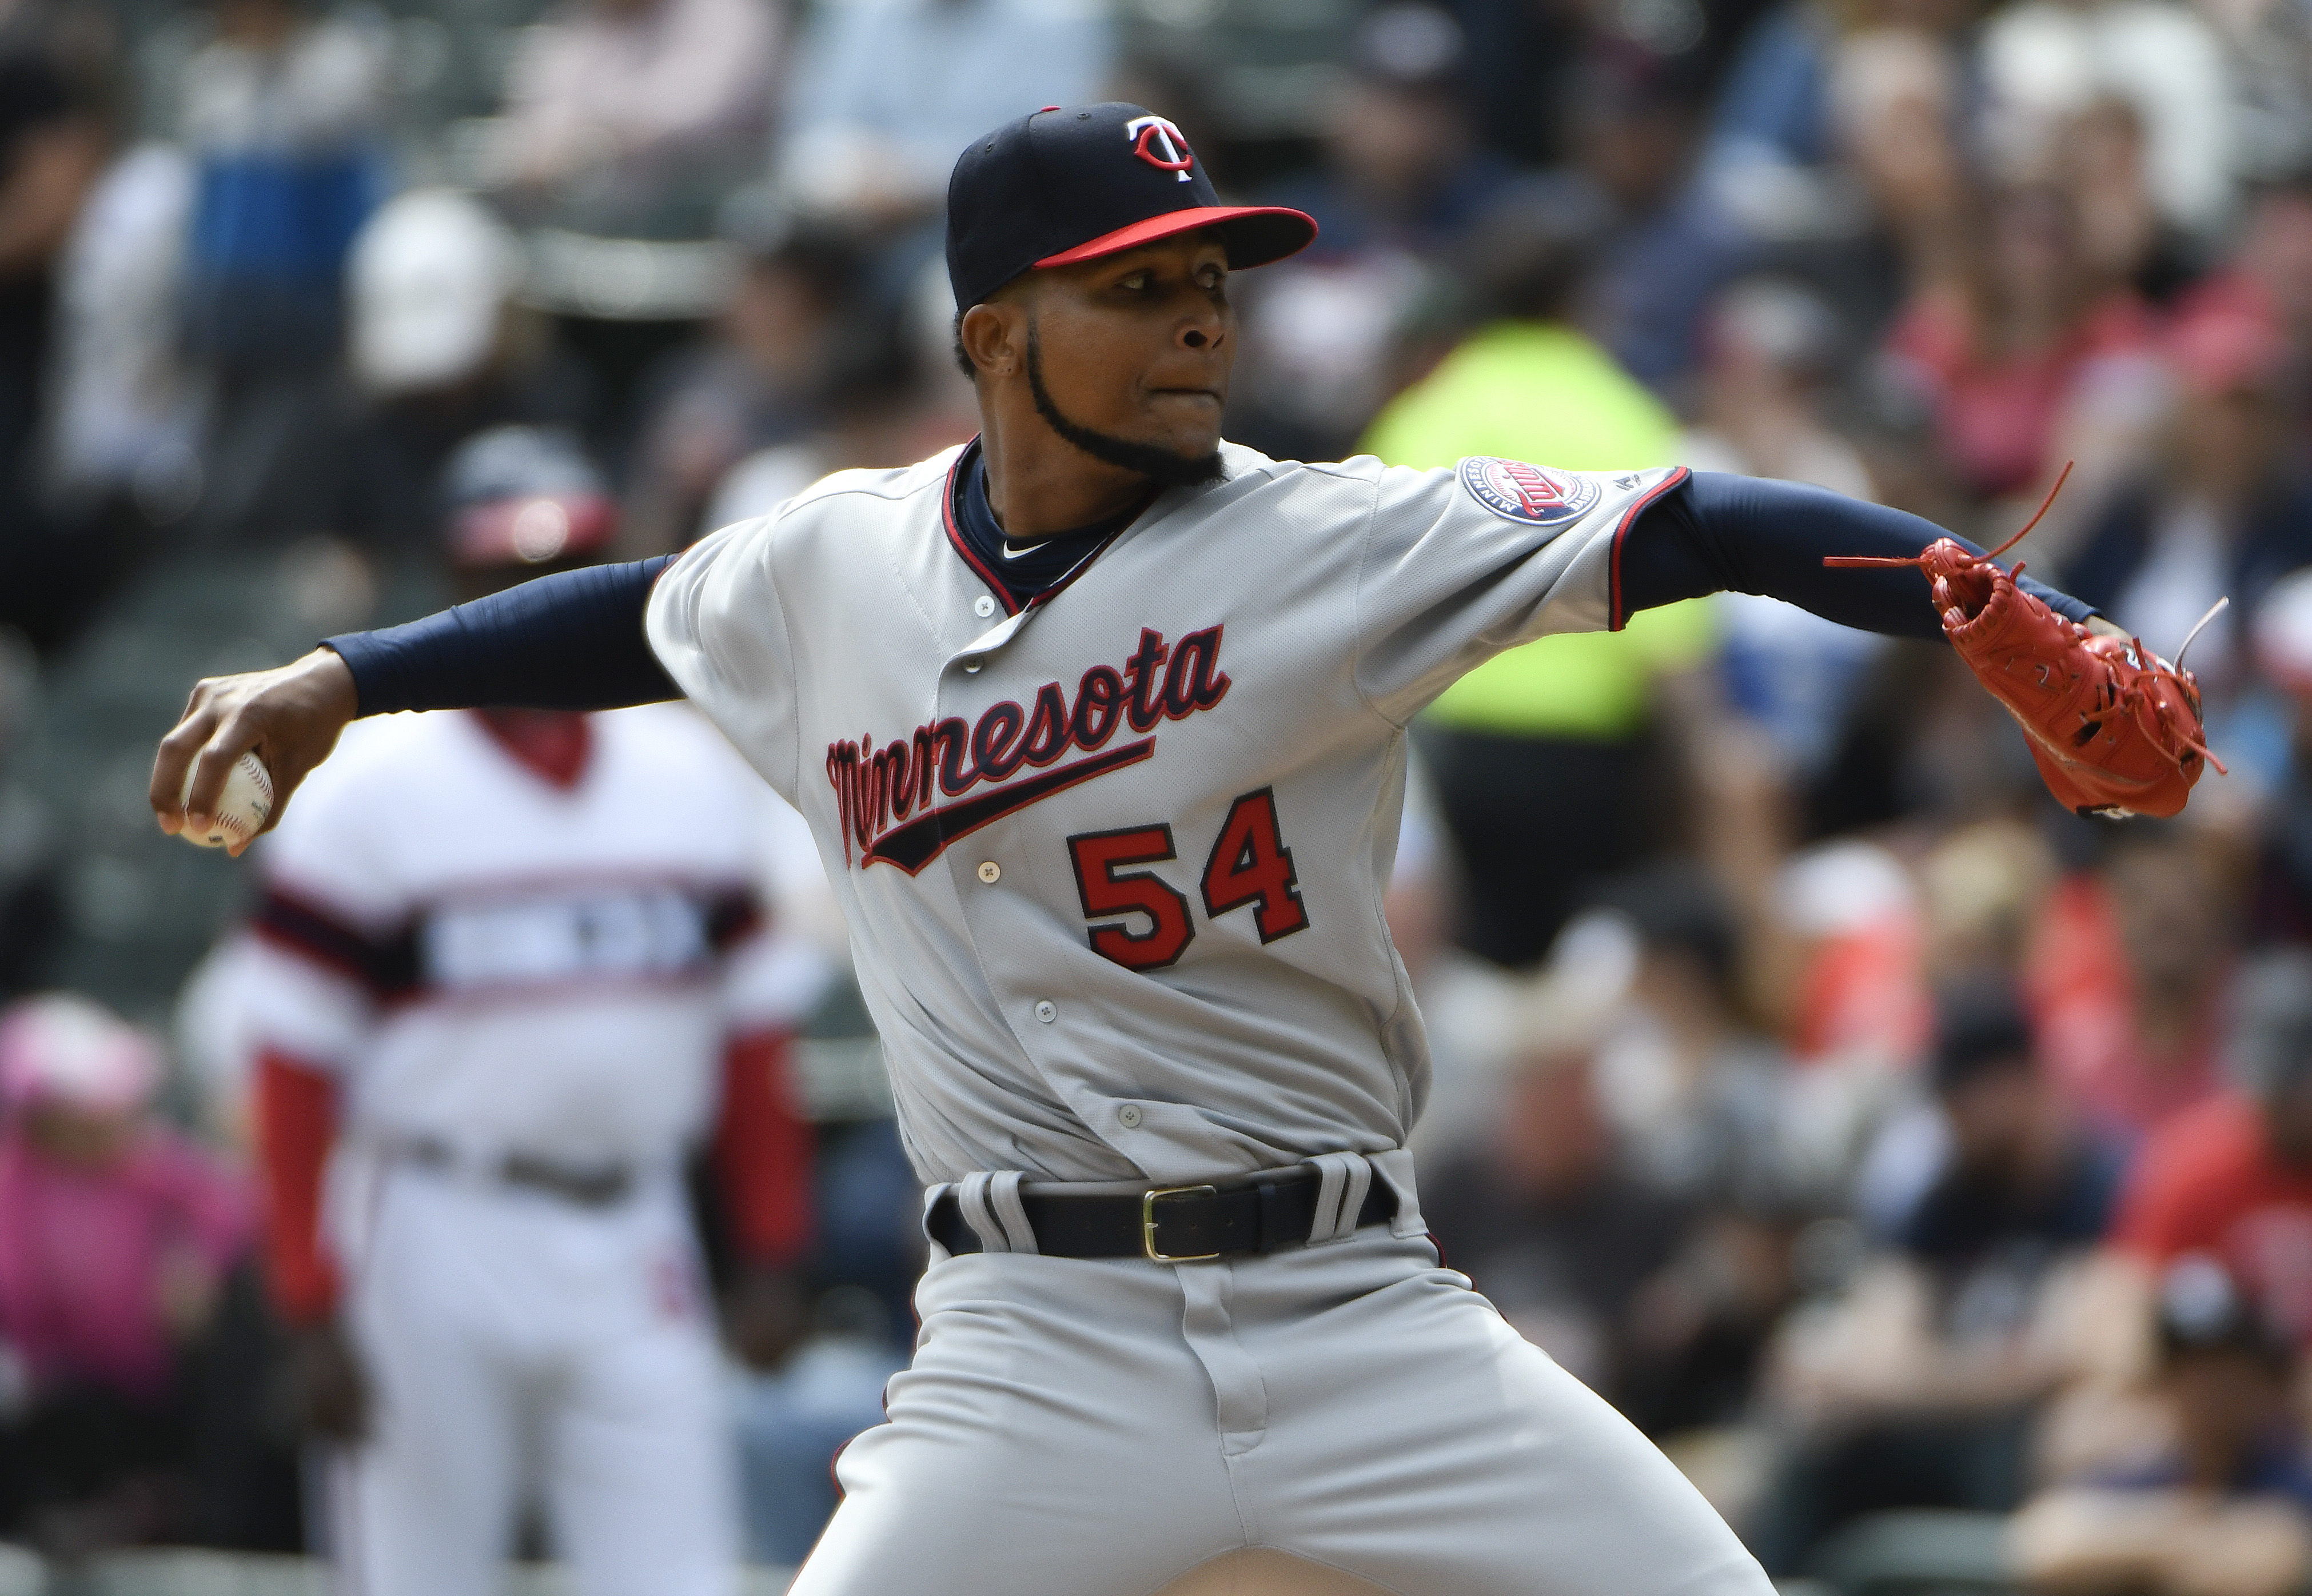 Twins 4, White Sox 1 - Back in the saddle